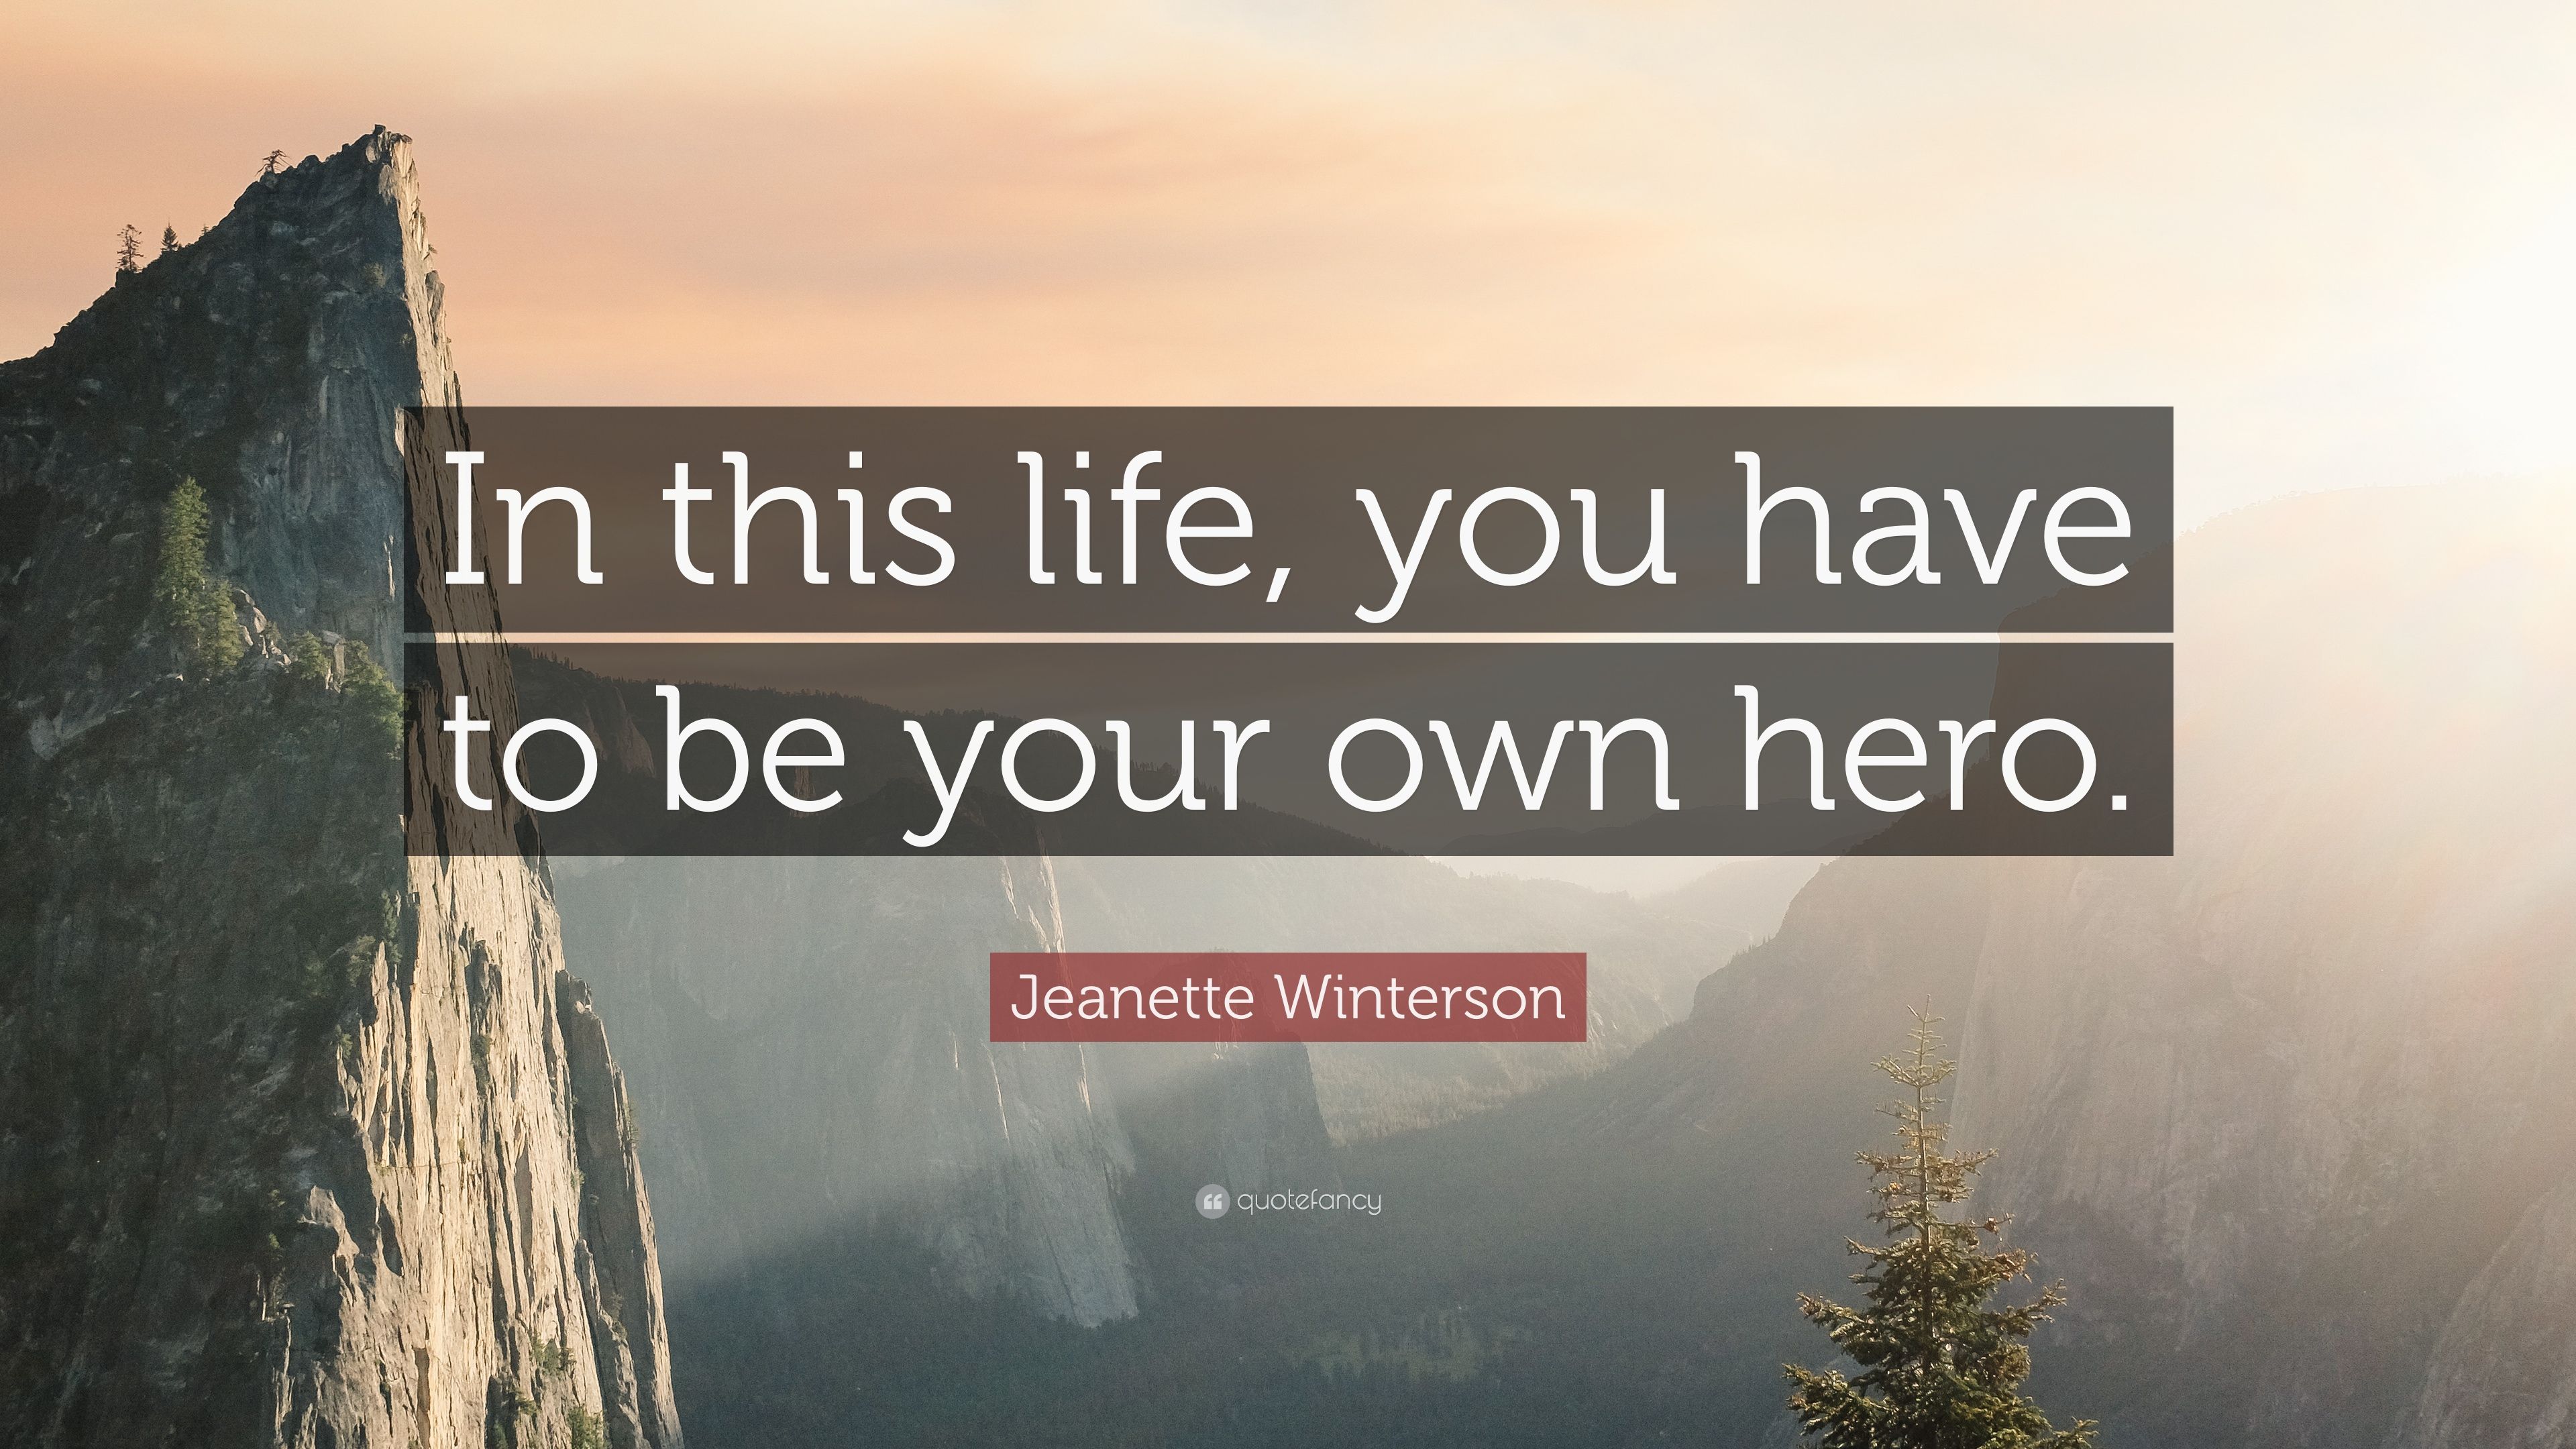 Jeanette Winterson Quote: “In this life .quotefancy.com